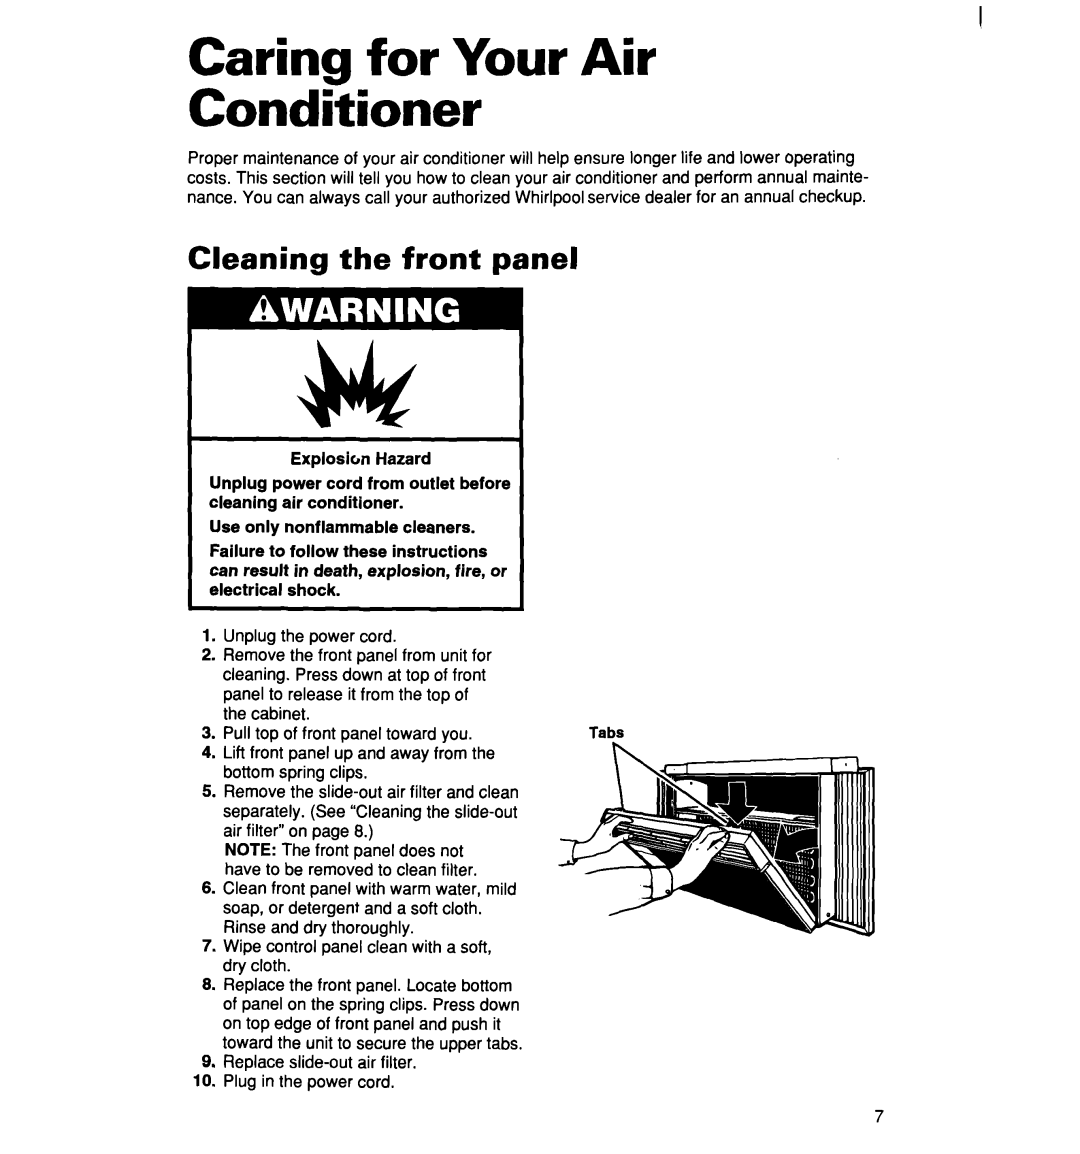 Whirlpool ACM062, ACM072 warranty Caring for Your Air Conditioner, Cleaning the front panel 